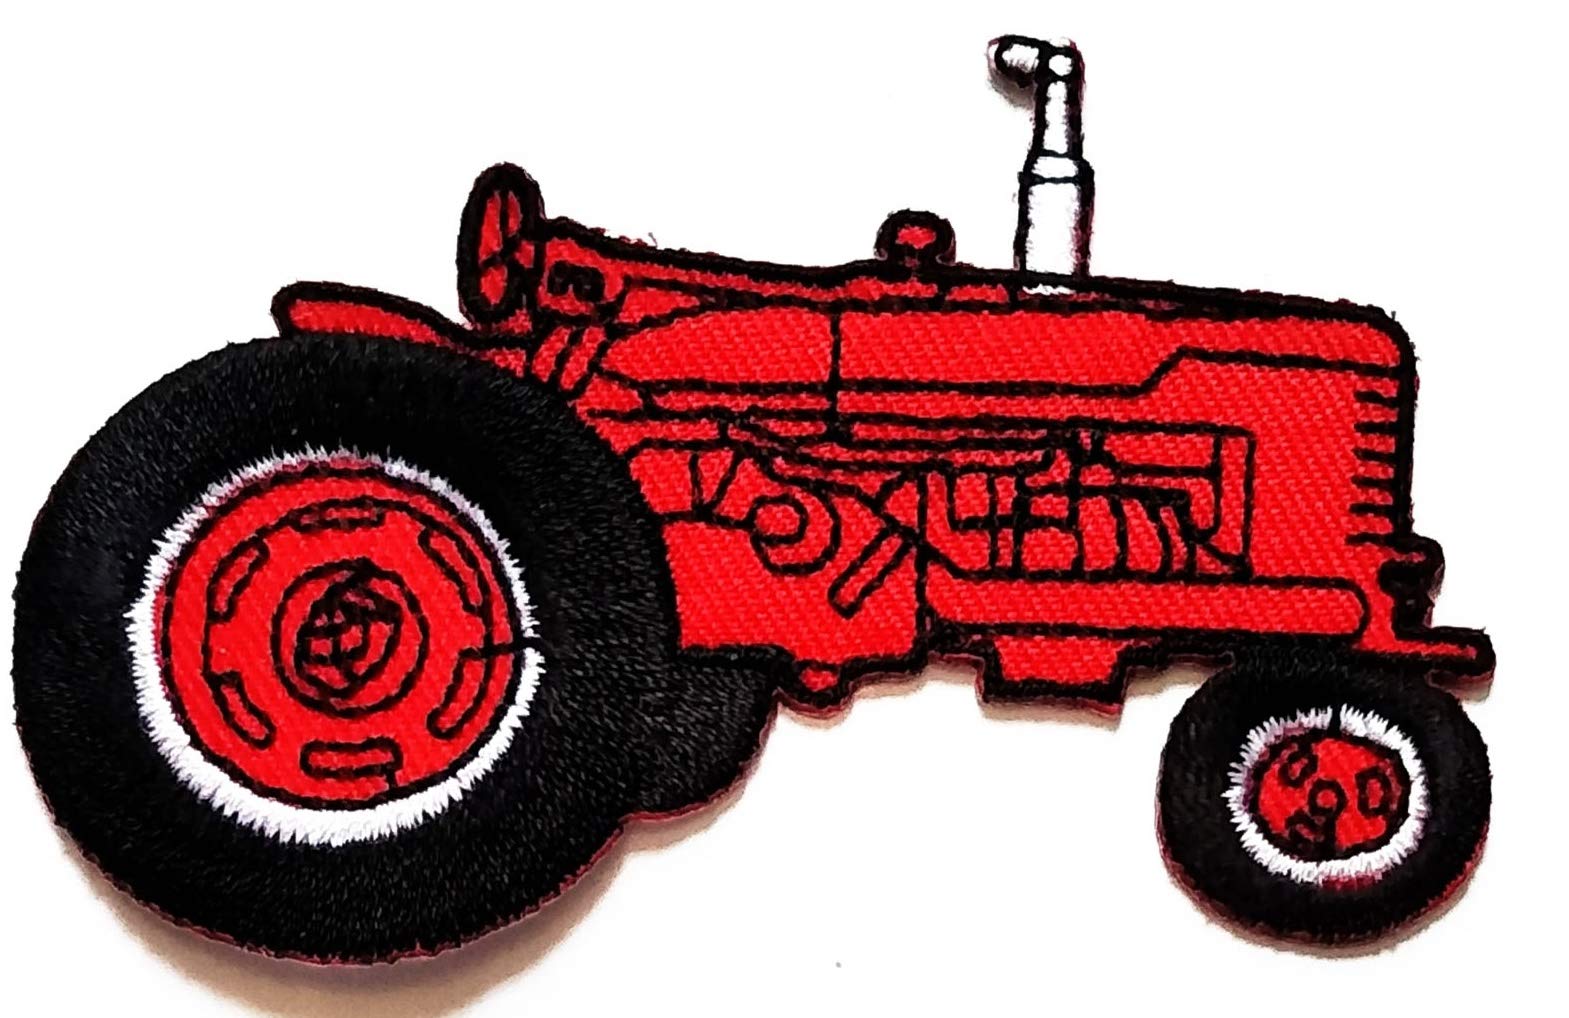 Nipitshop Patches Red Car No roof Tractor Farm Tractor Cartoon Children Kids Embroidered Iron Patch Sew On Patch Clothes Bag T-Shirt Jeans Biker Badge Applique for Happy Birthday Gift